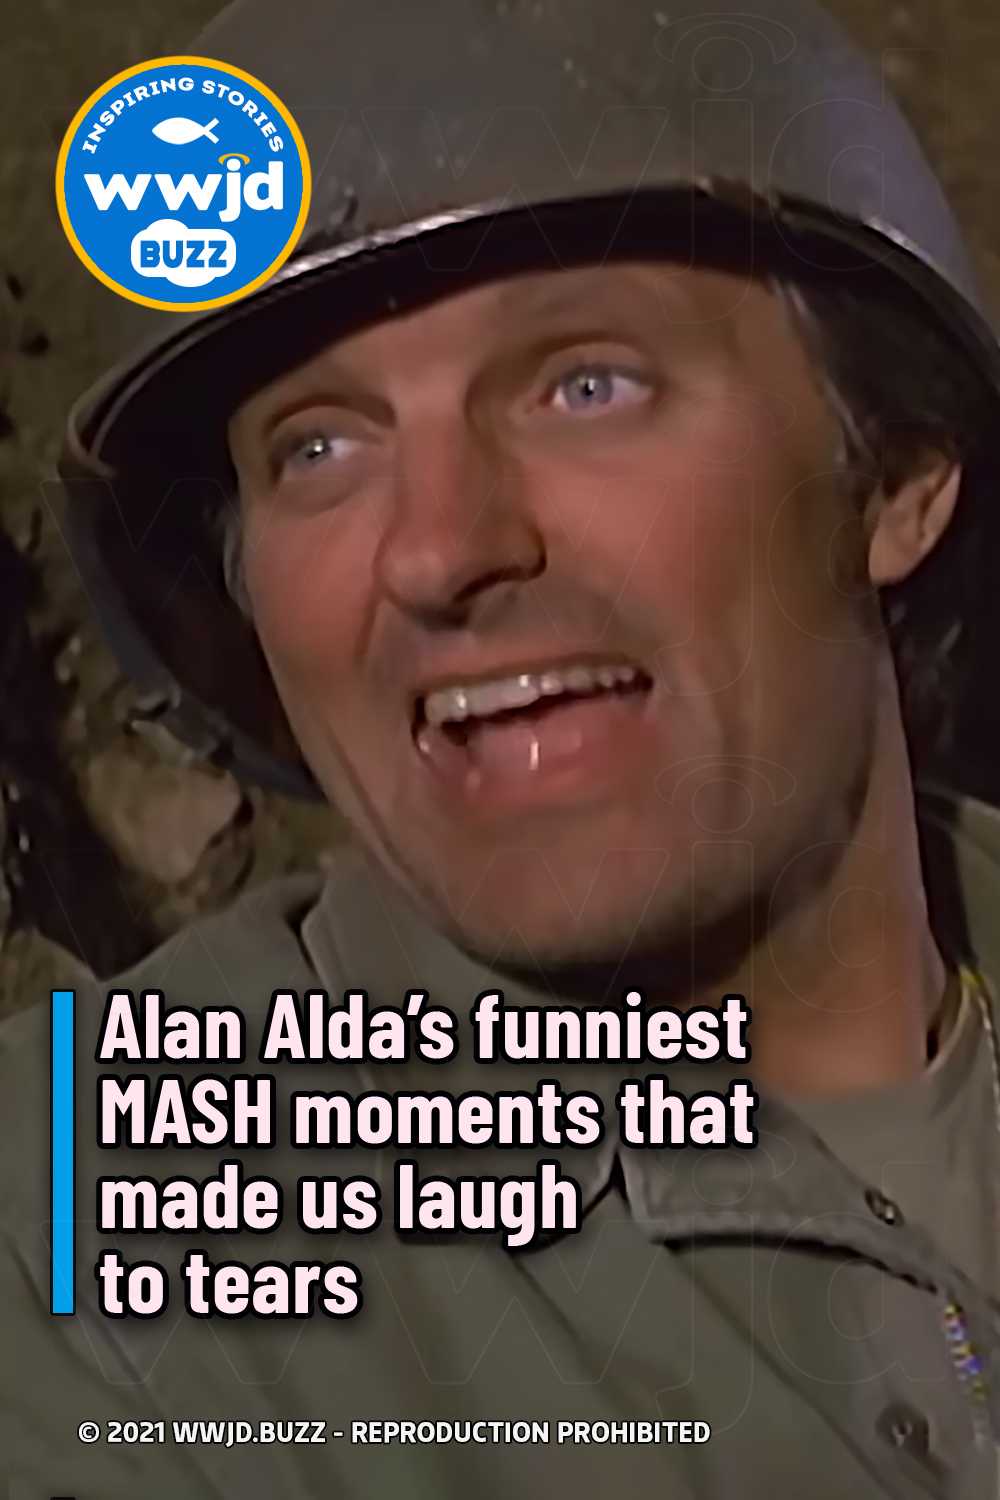 Alan Alda’s funniest MASH moments that made us laugh to tears